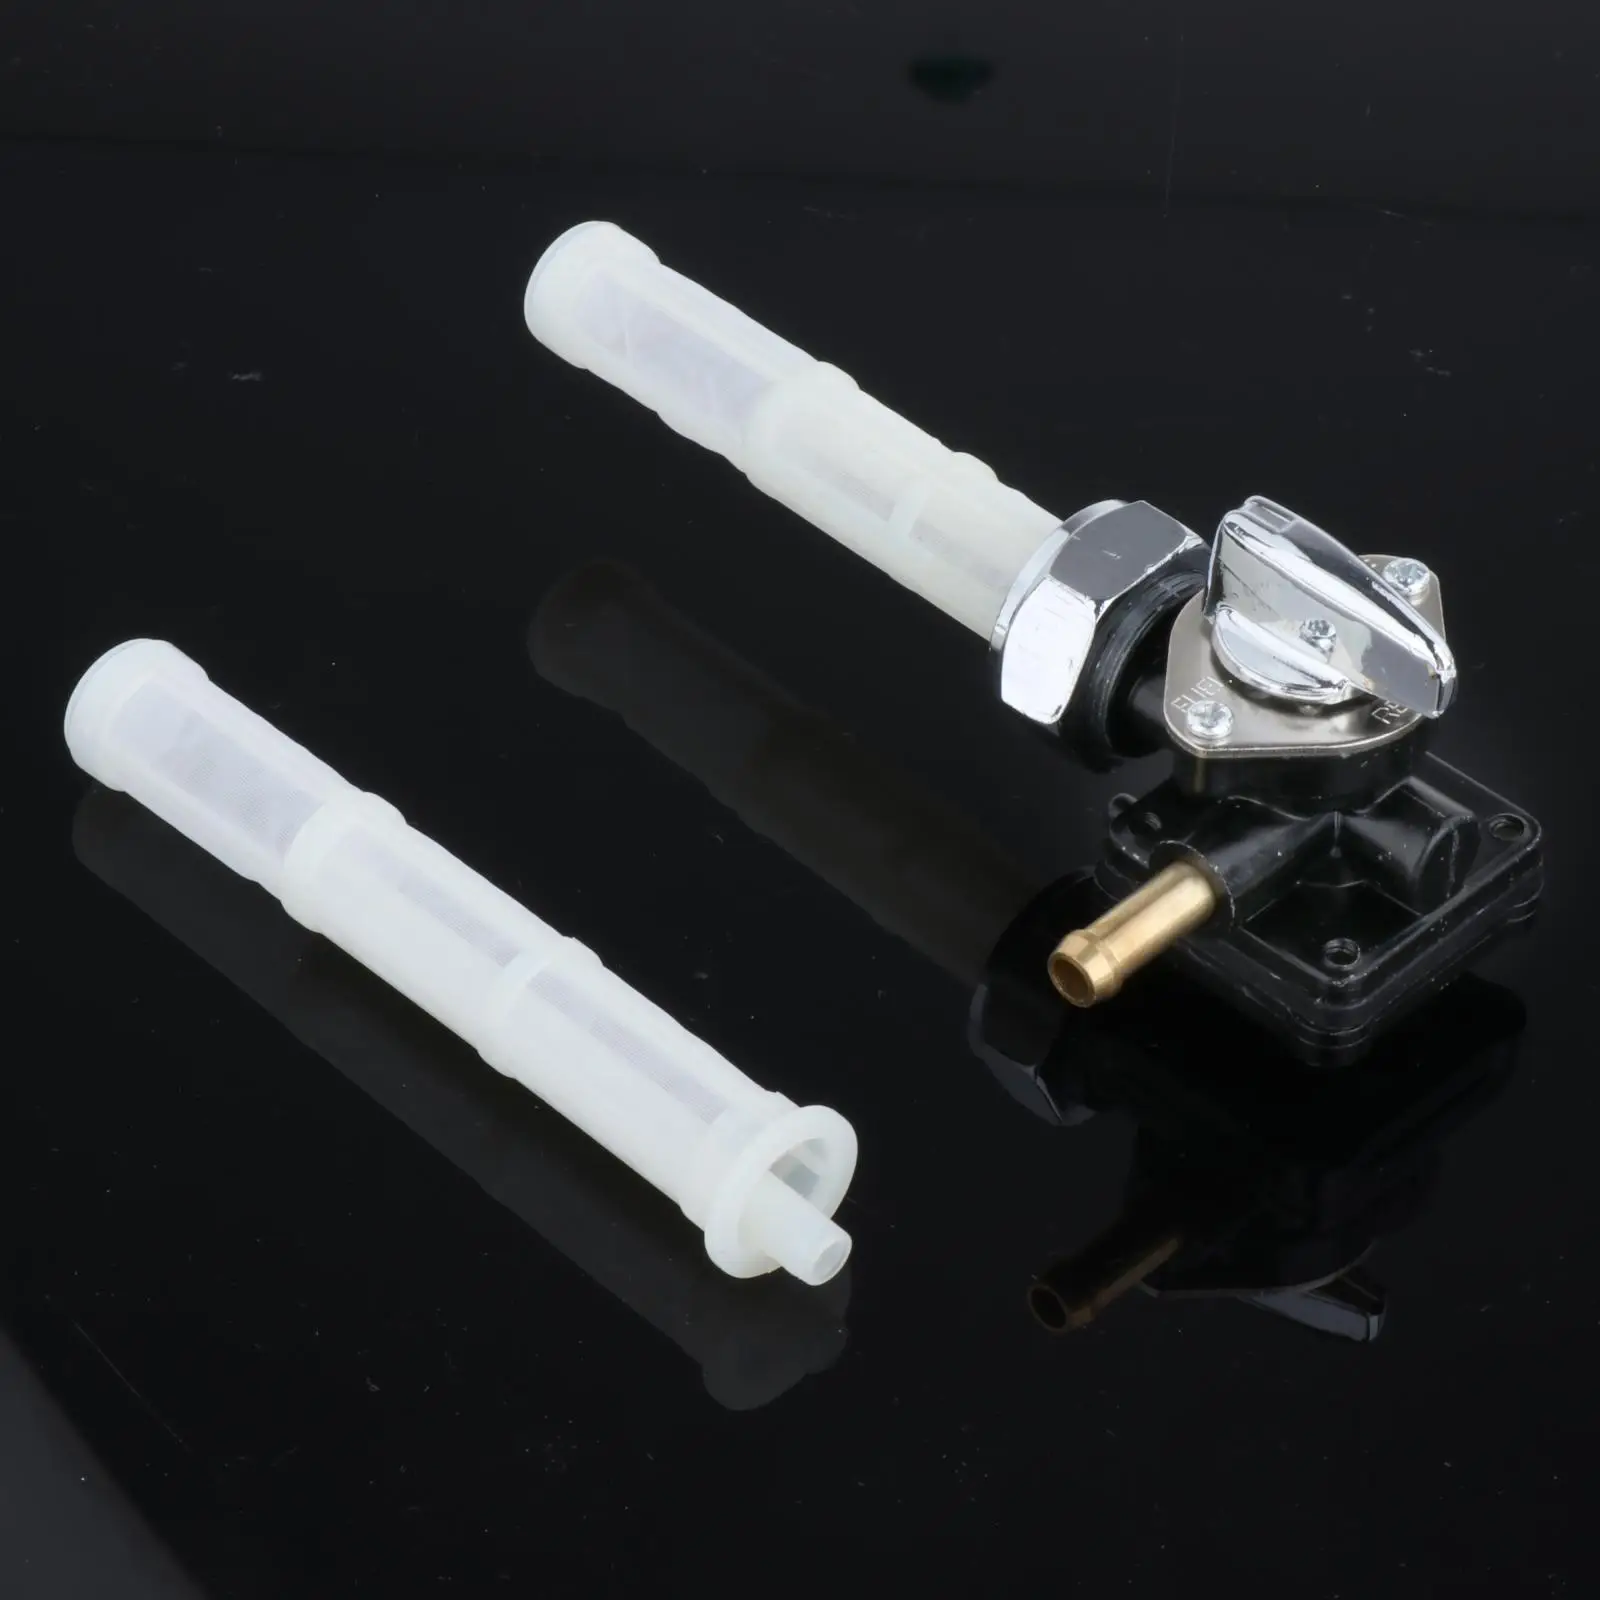 Fuel Switch Valve Petcock with Filter Mesh Strong Gas Shut Off Switch for Flst Fxst Fxd Replacement Motorbike Accessory